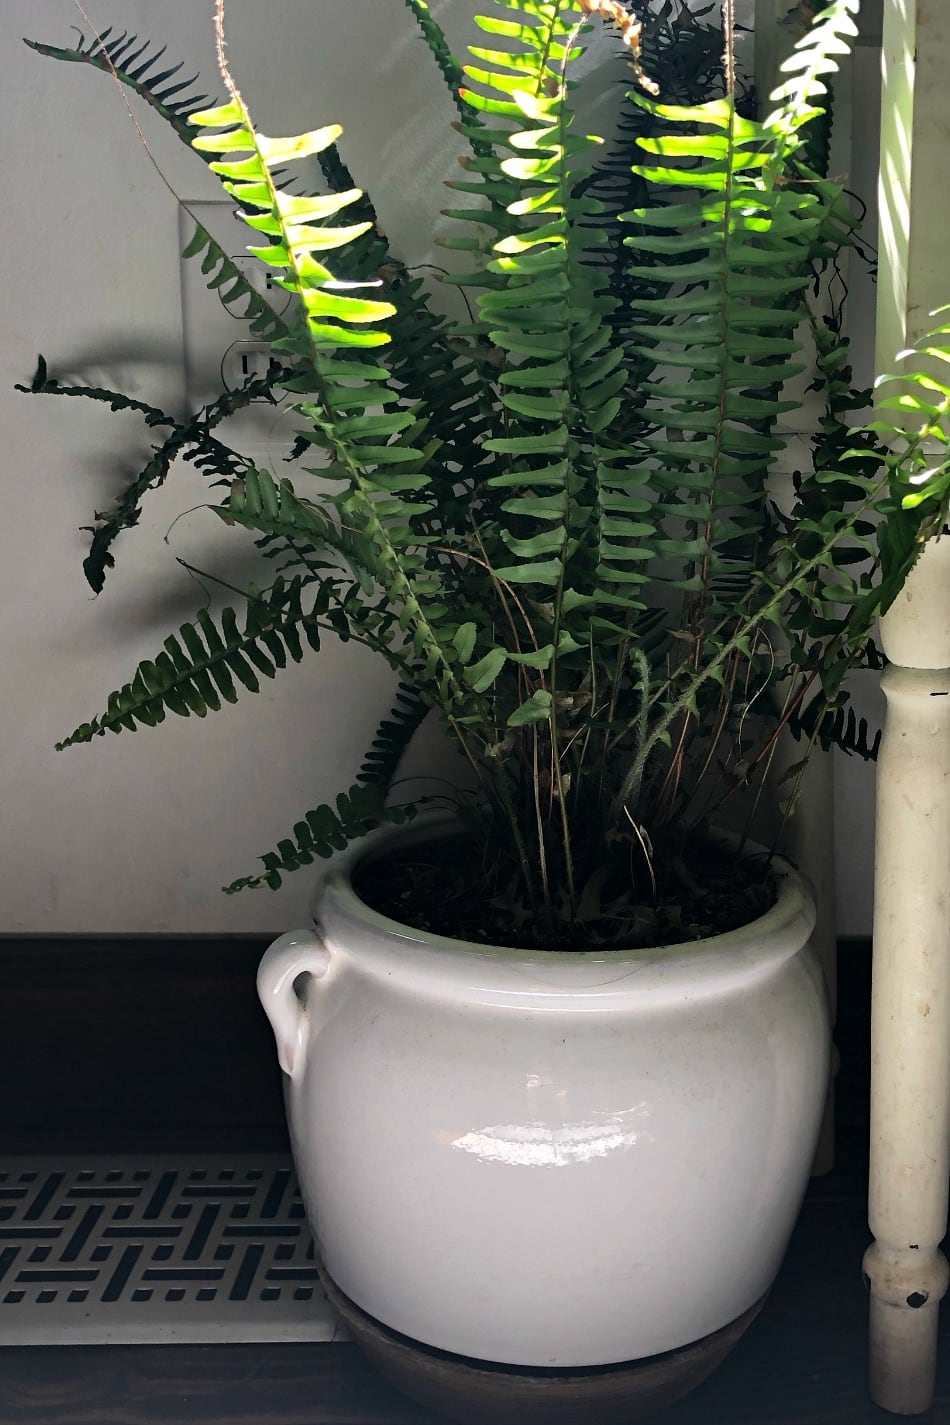 14 Air-Purifying Houseplants For Clean Air & A Beautiful Home | Growing Up Herbal | Here are 14 air-purifying houseplants that are great for indoors, easy to grow and care for (even for beginners), and make lovely additions to your home!